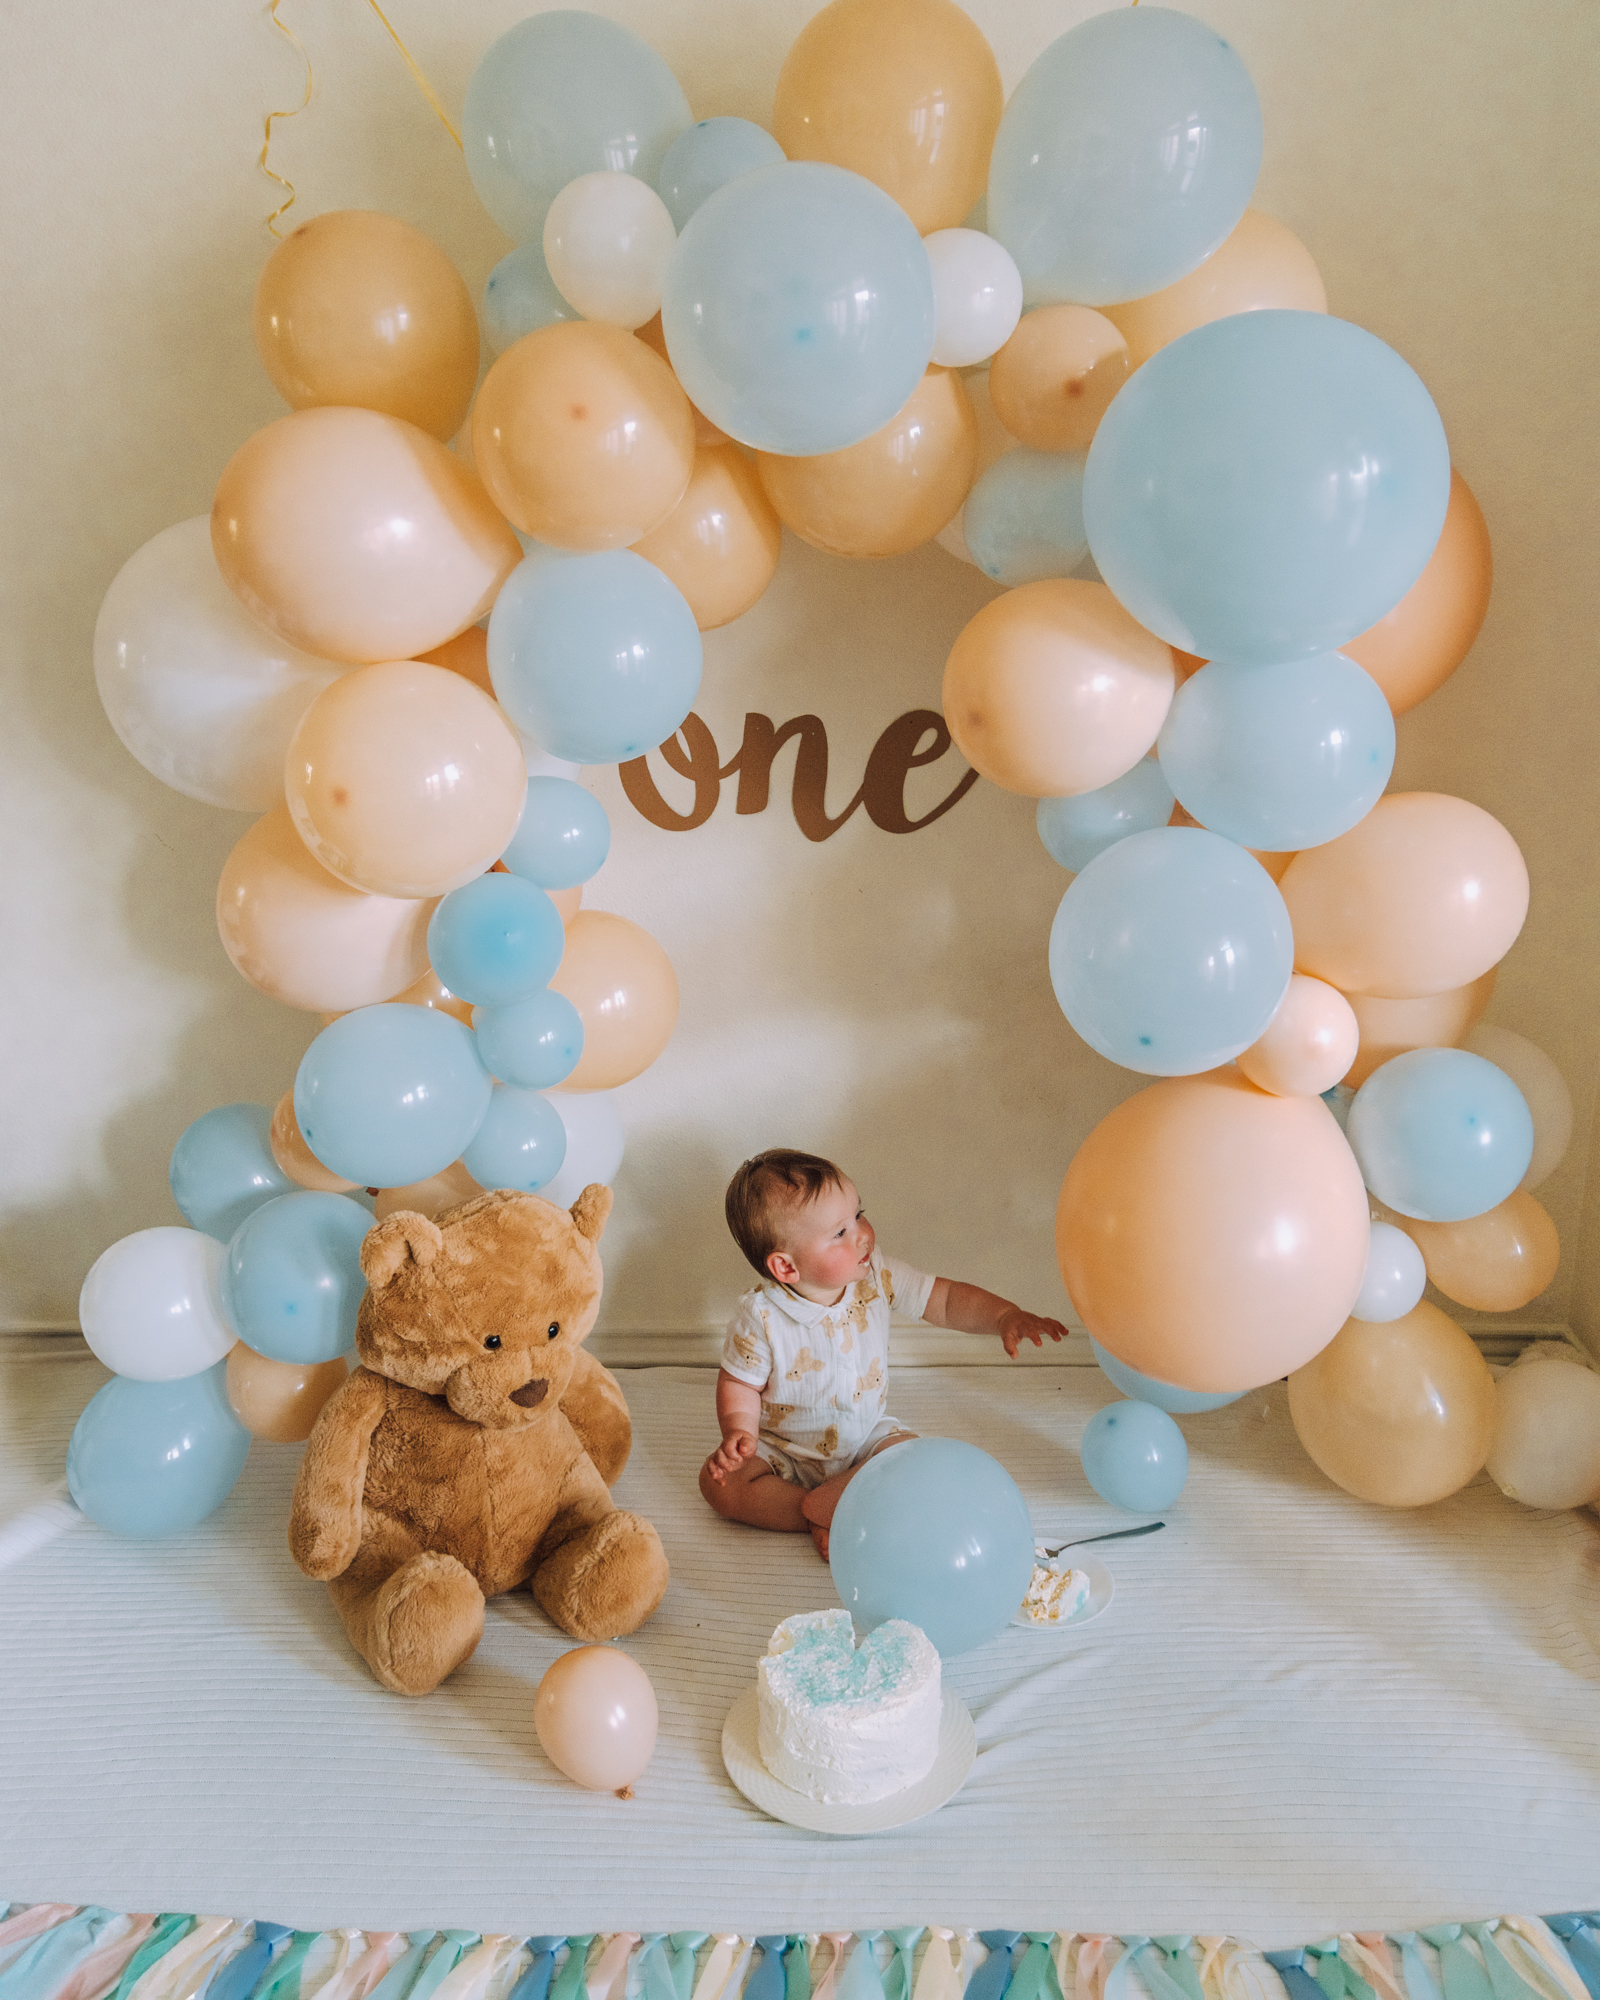 Baby cake smash idea with pastel balloon arch, teddy bear, and layered cake.